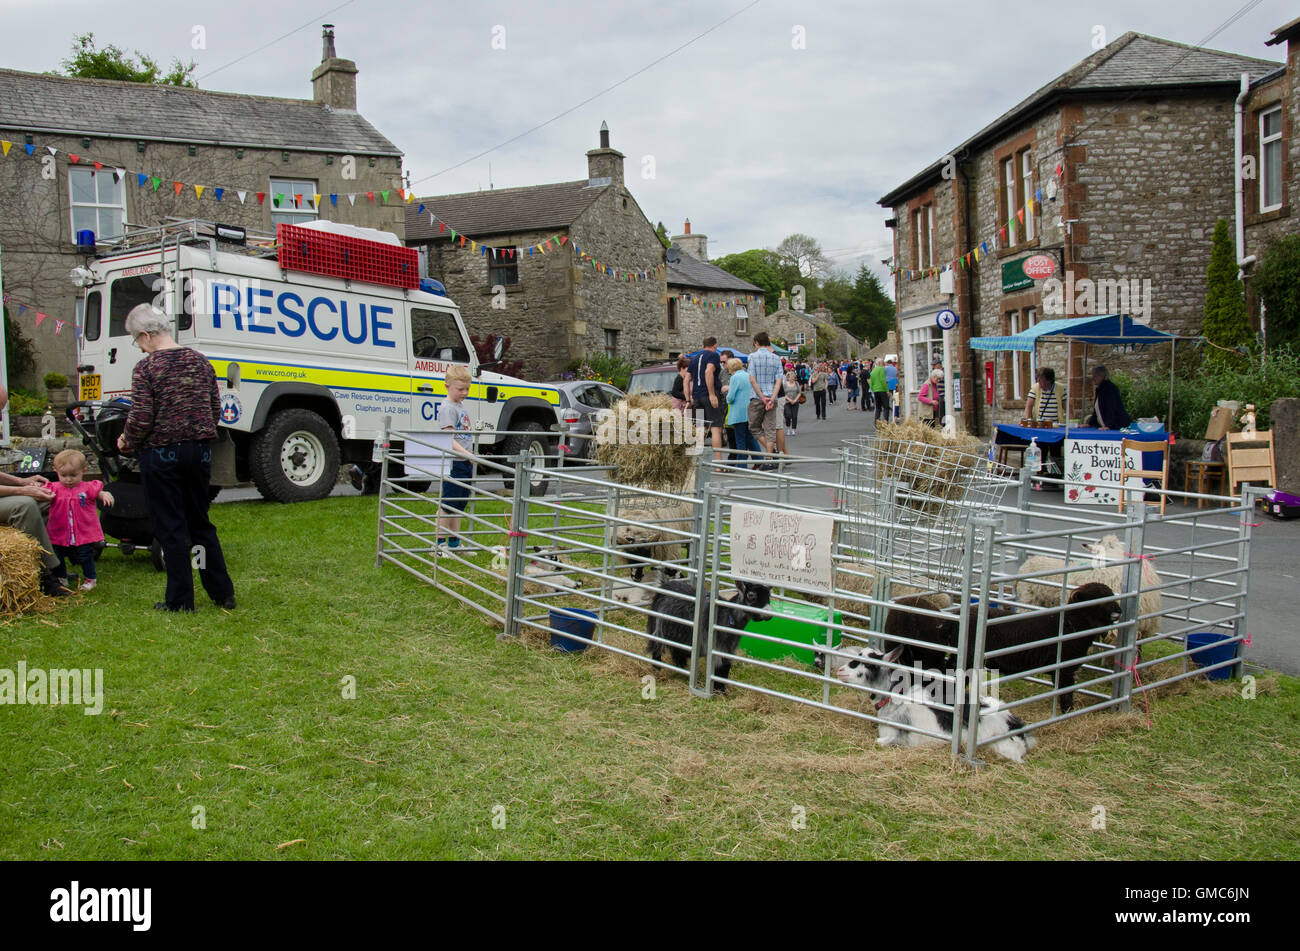 Sheep pens and displays on Austwick village green at the time of the Cuckoo Festival & Street Market - Yorkshire Dales, England. Stock Photo